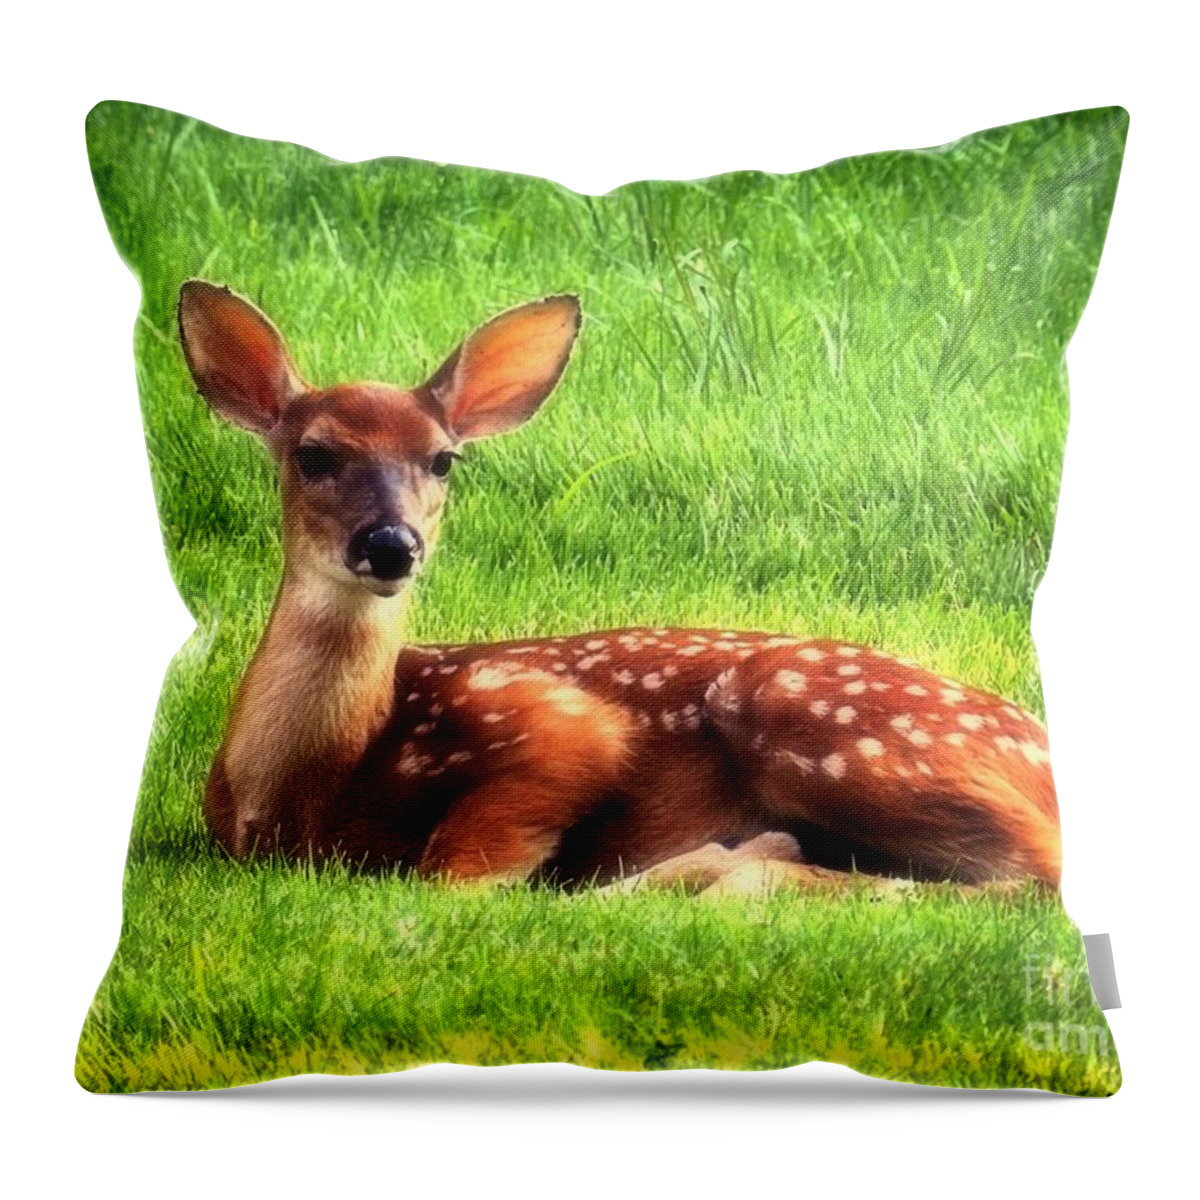 Whitetail Throw Pillow featuring the photograph Whitetail Fawn by Sharon Woerner